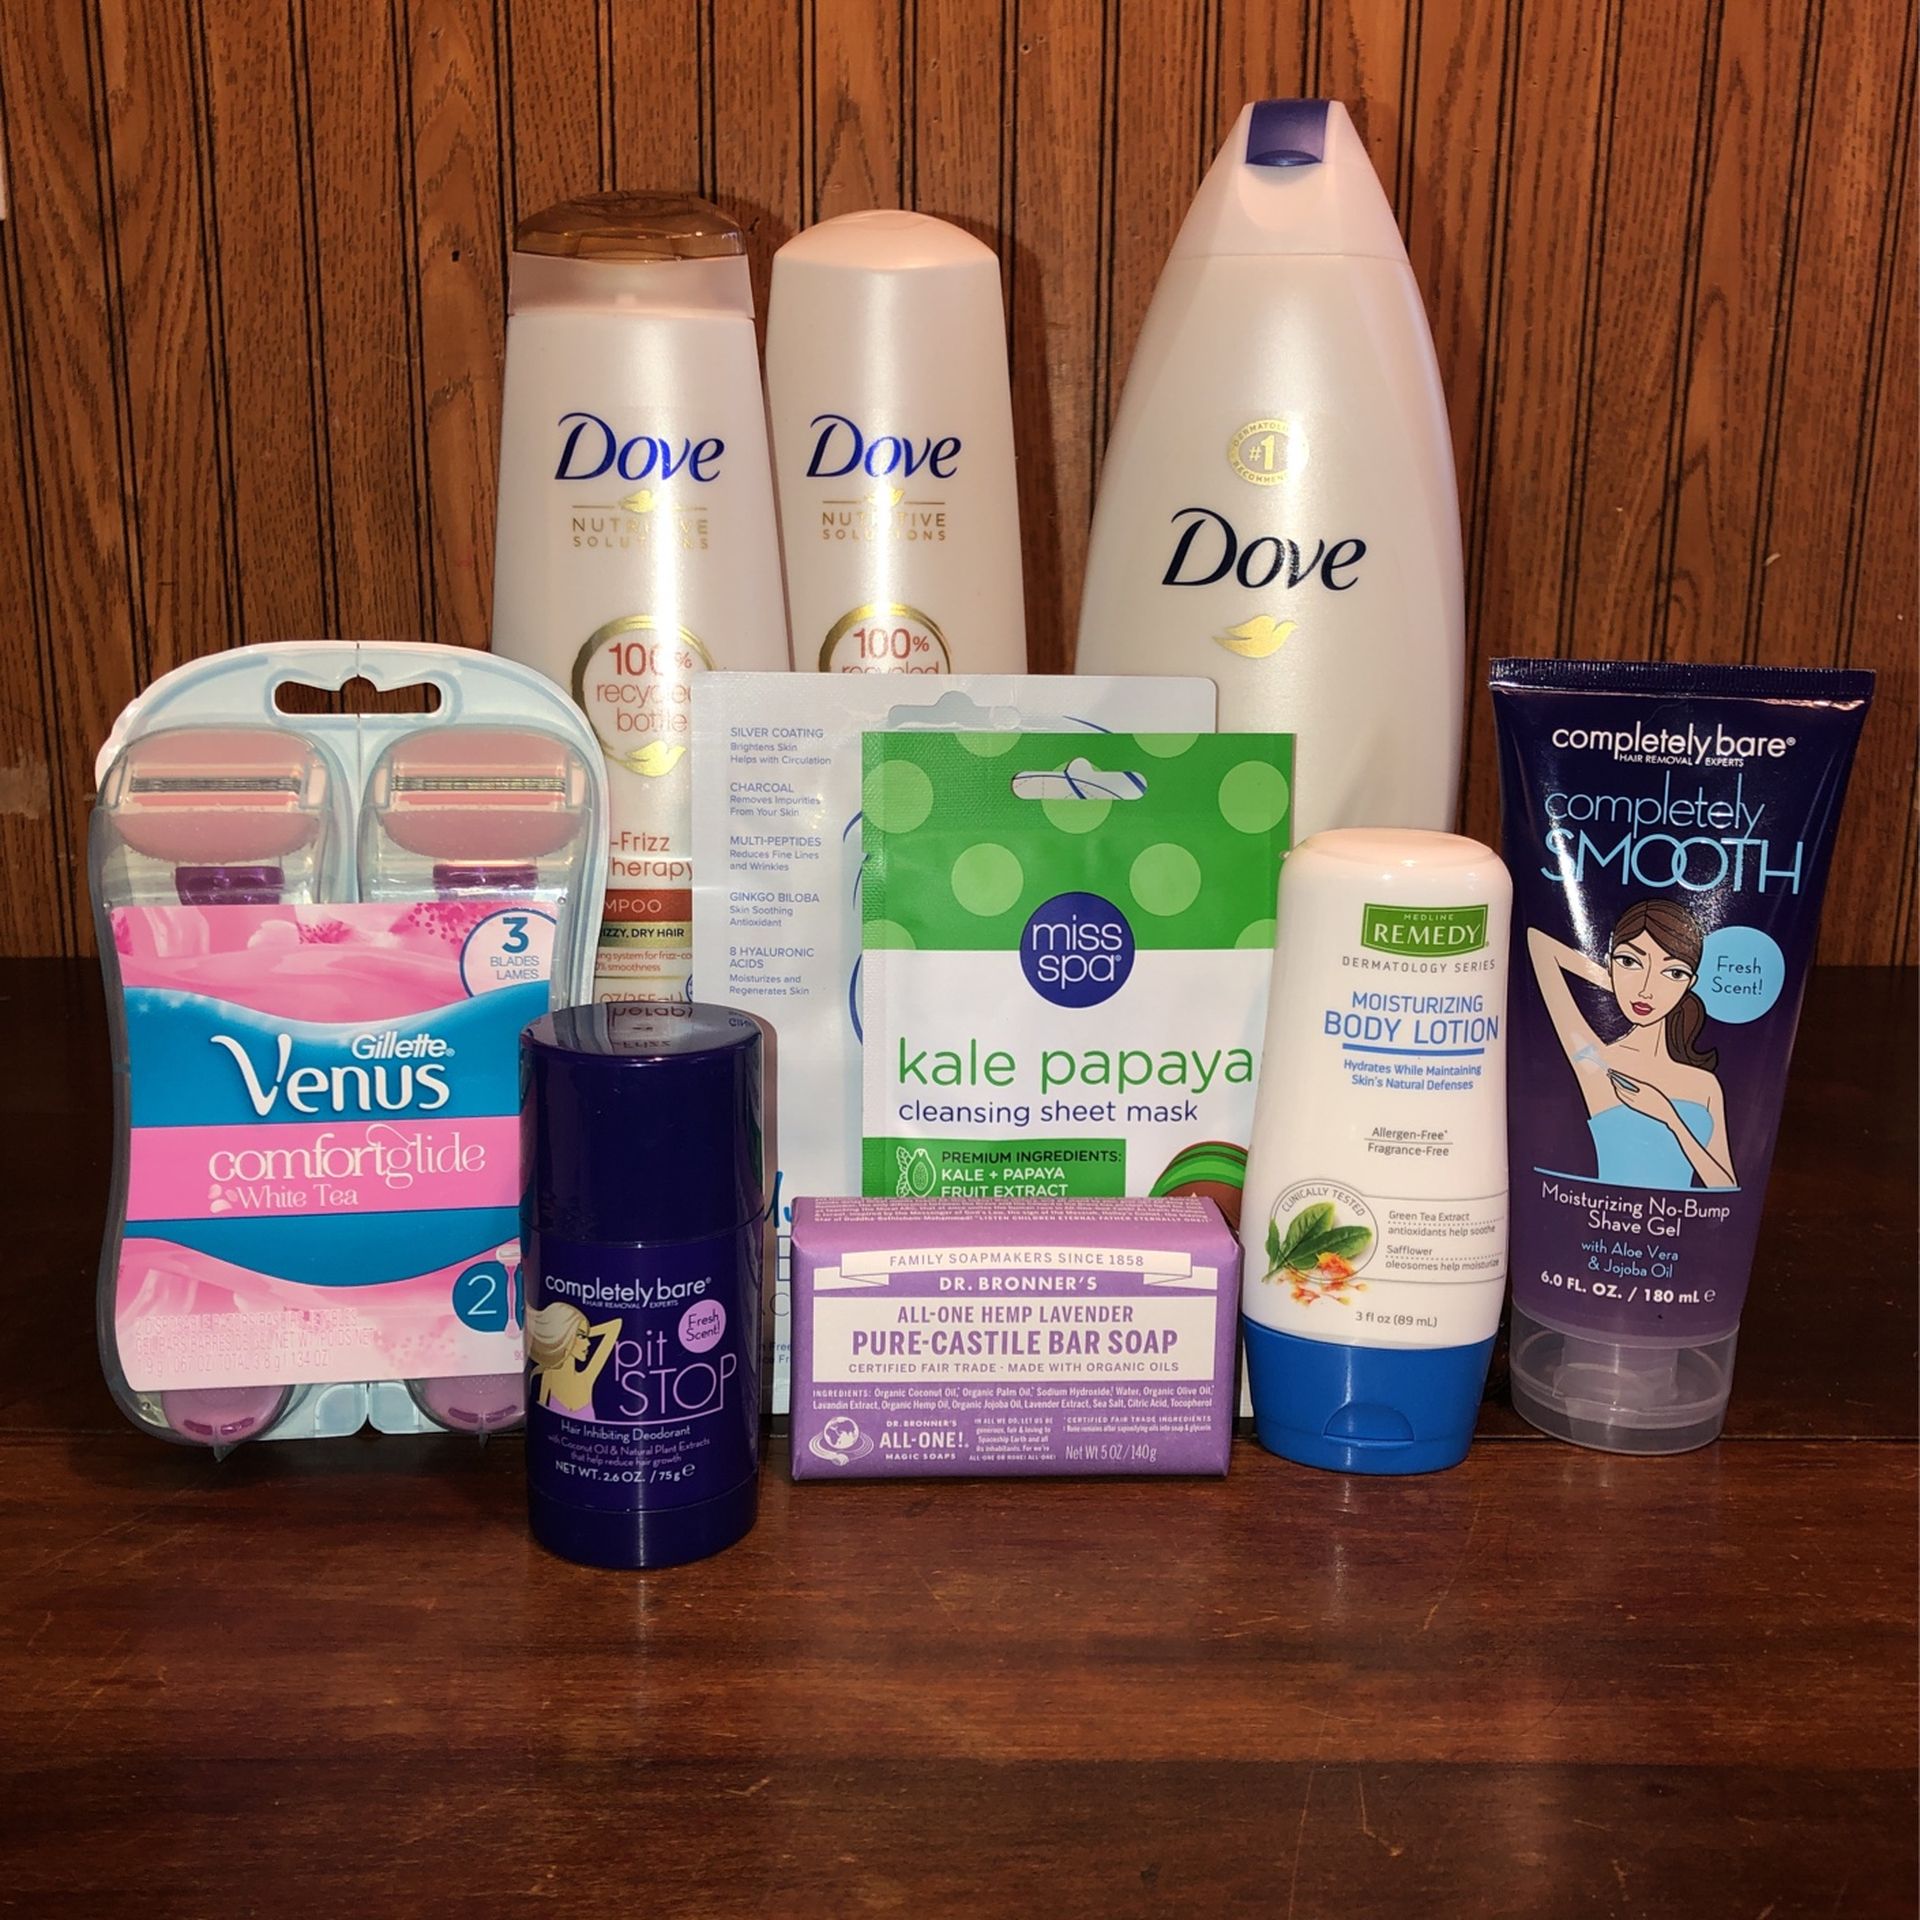 All Brand NEW! 🆕 Dove / Dr. Bronner’s / Gillette Venus / Completely Bare - Body Care Products (((PENDING PICK UP TODAY)))